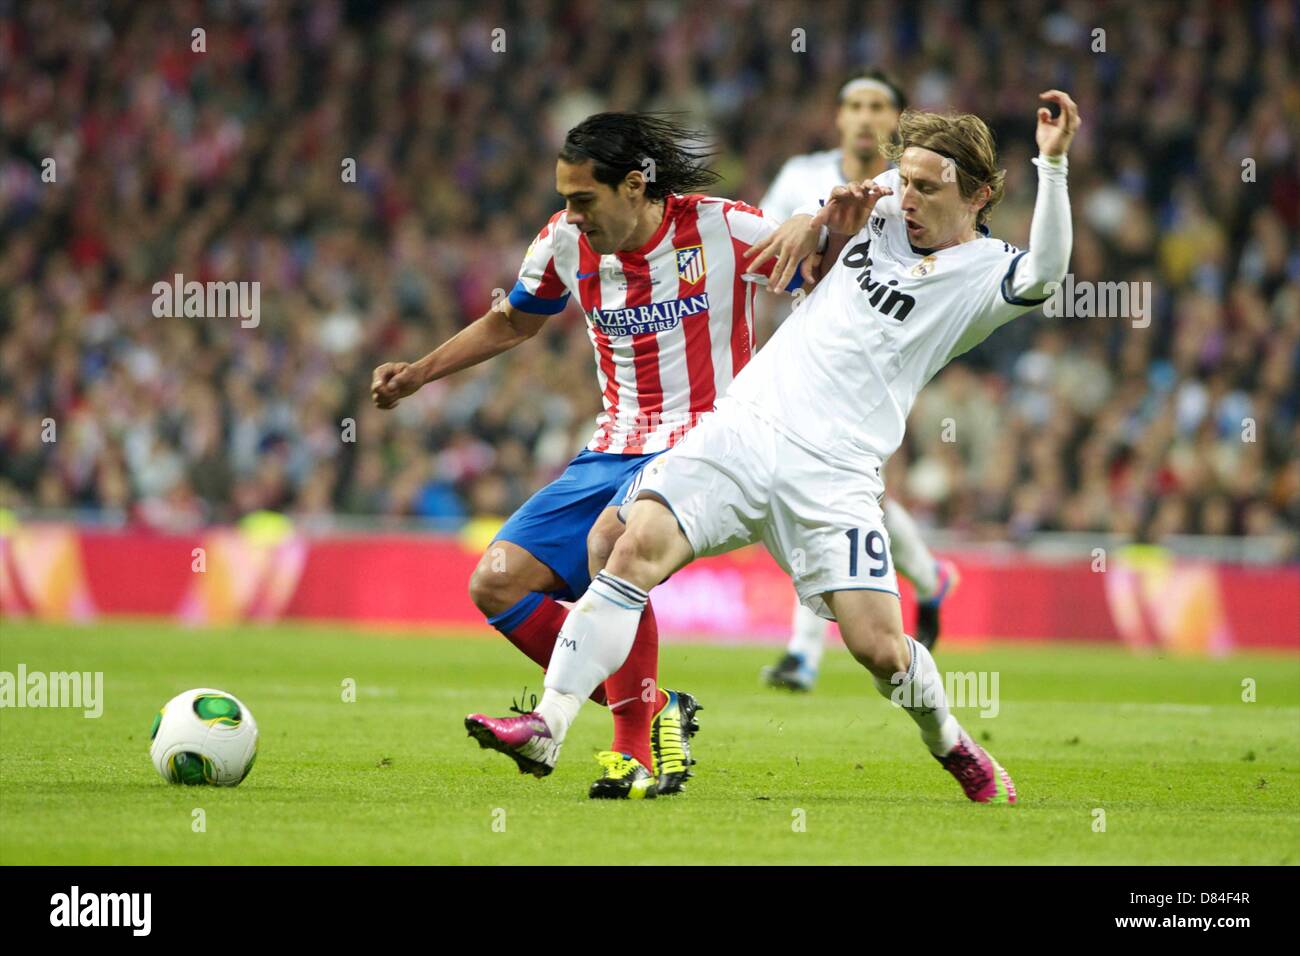 17.05.2013. Madrid, Spain. Copa del Rey final. Real Madrid versus Atletico Madrid. Final score was (1-2) Falcao and Luka Modric Stock Photo